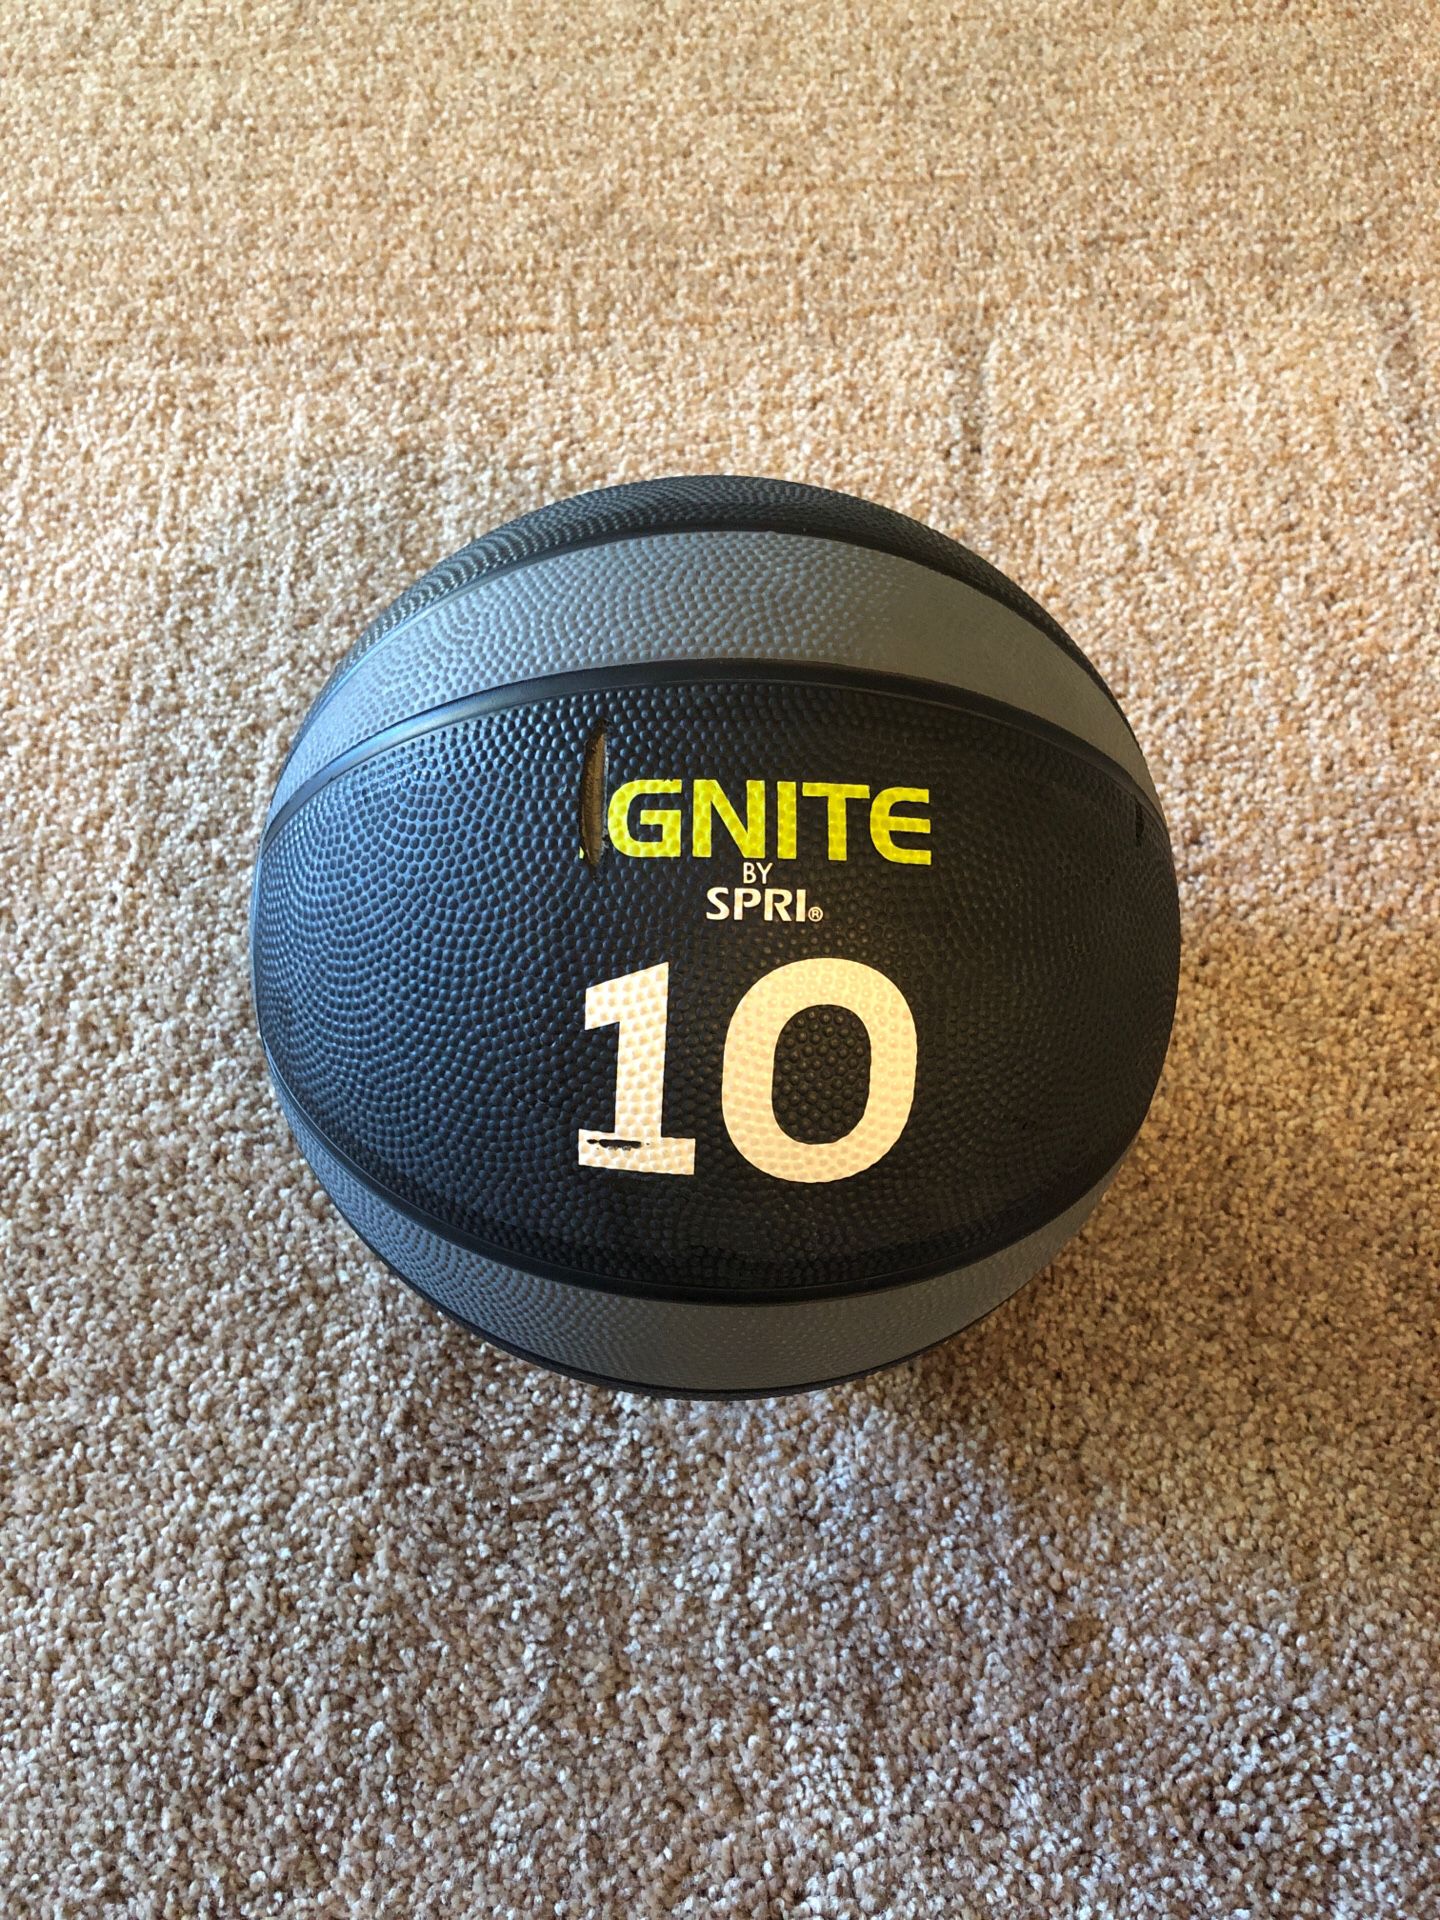 10 lbs weighted medicine ball